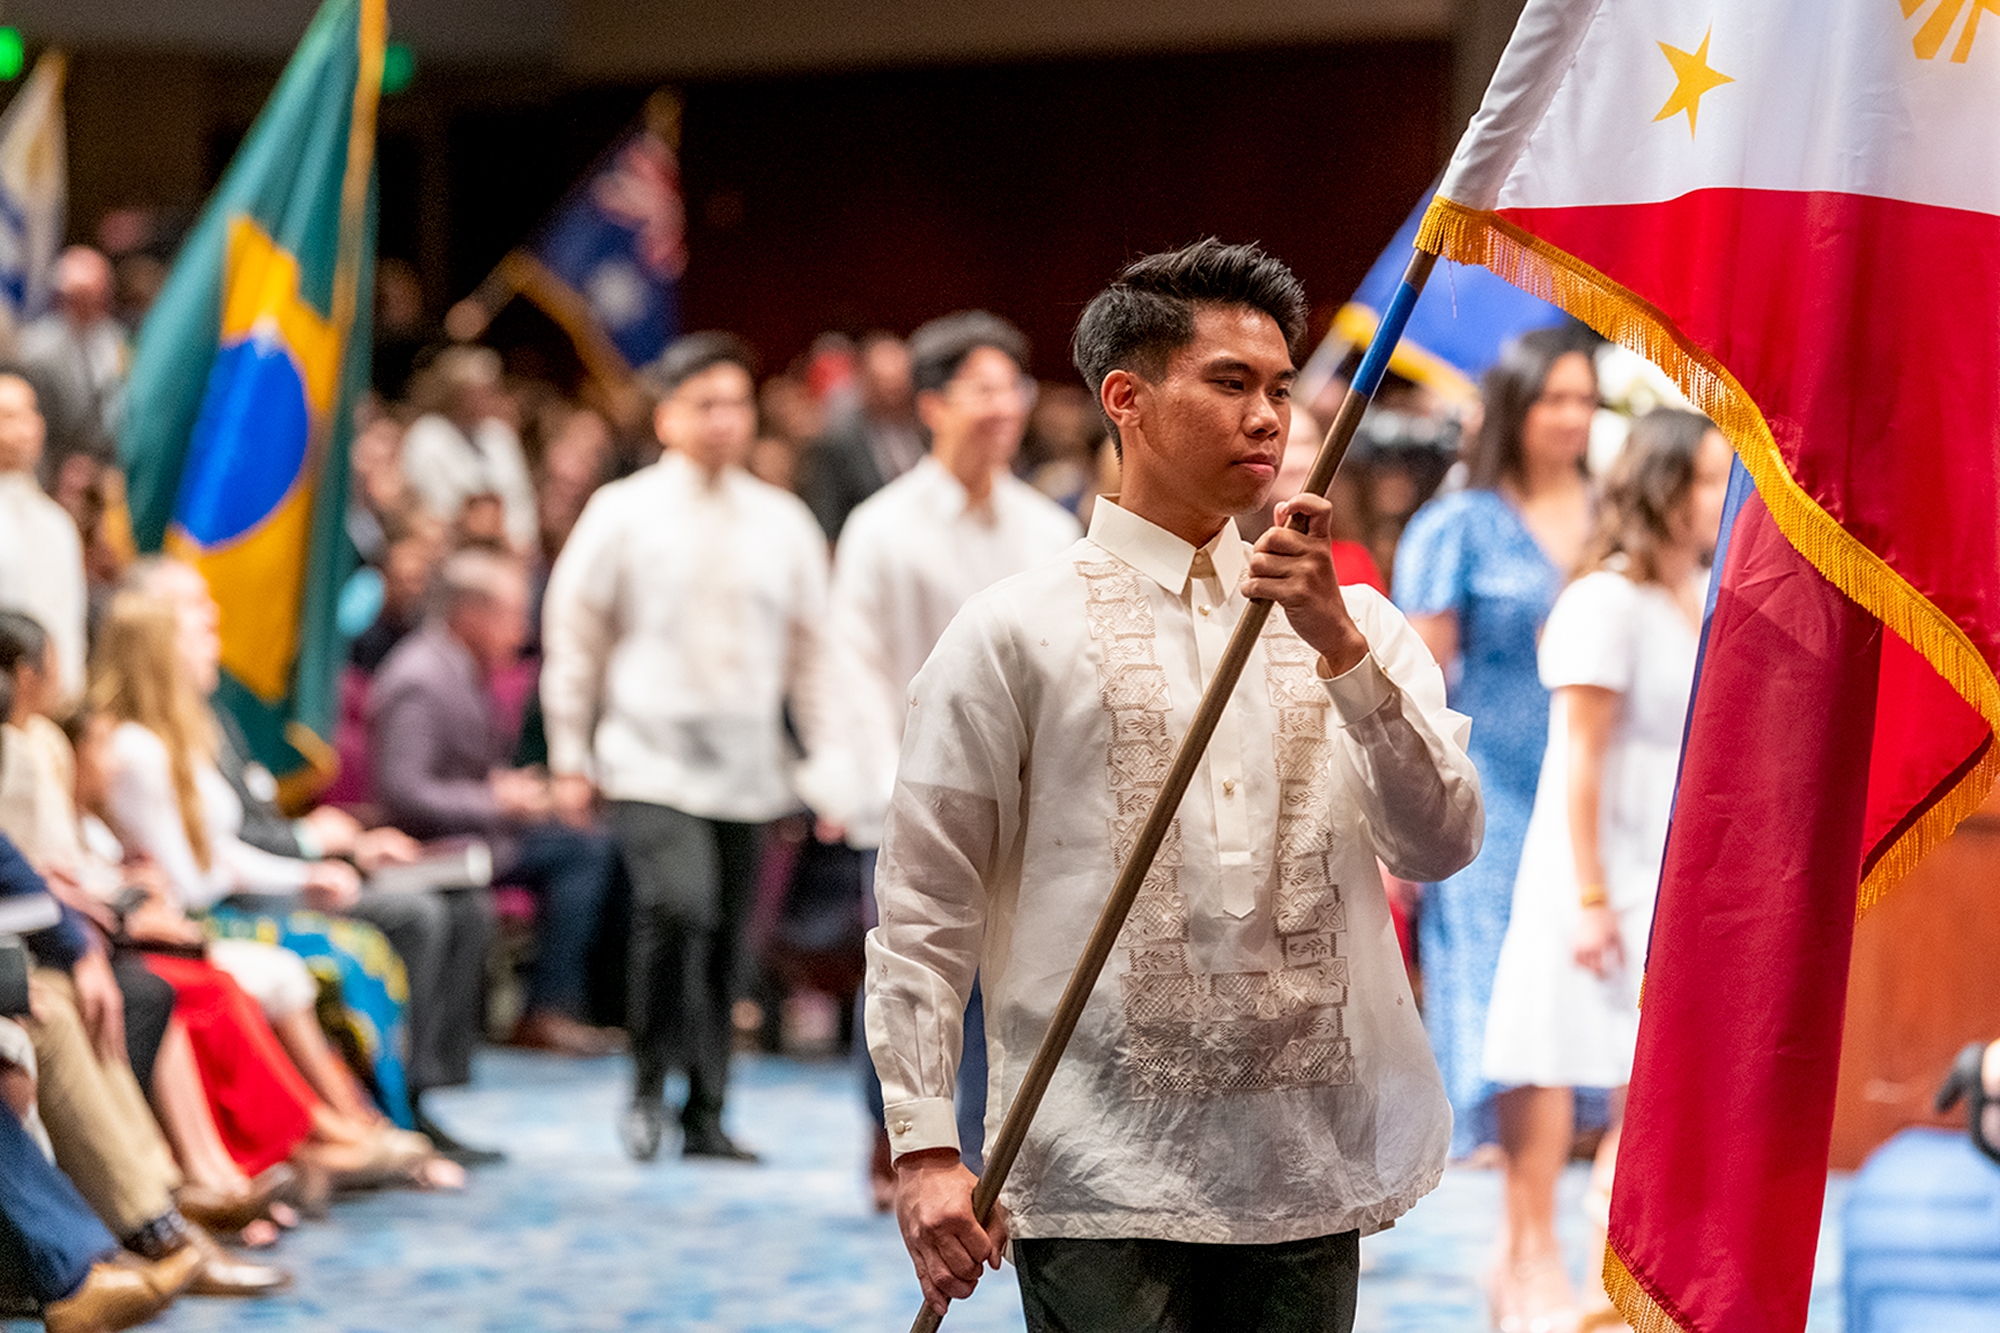 PCC students participating in the Parade of Nations